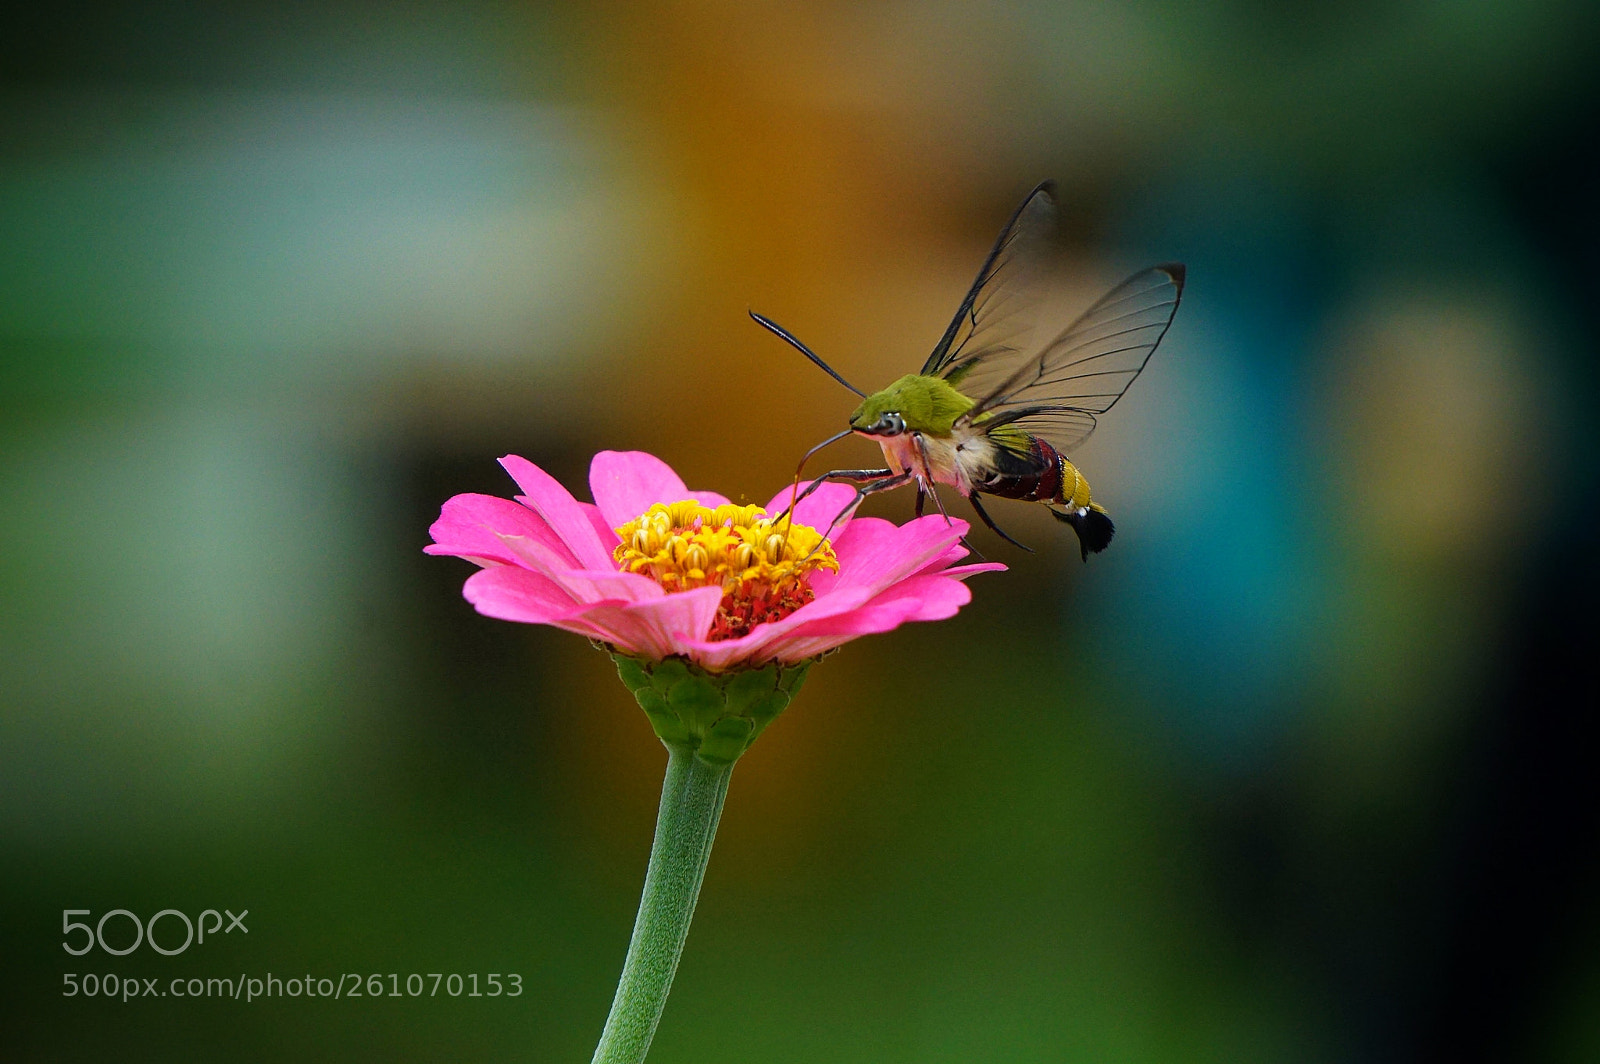 Sony a6000 sample photo. Flower and bee photography